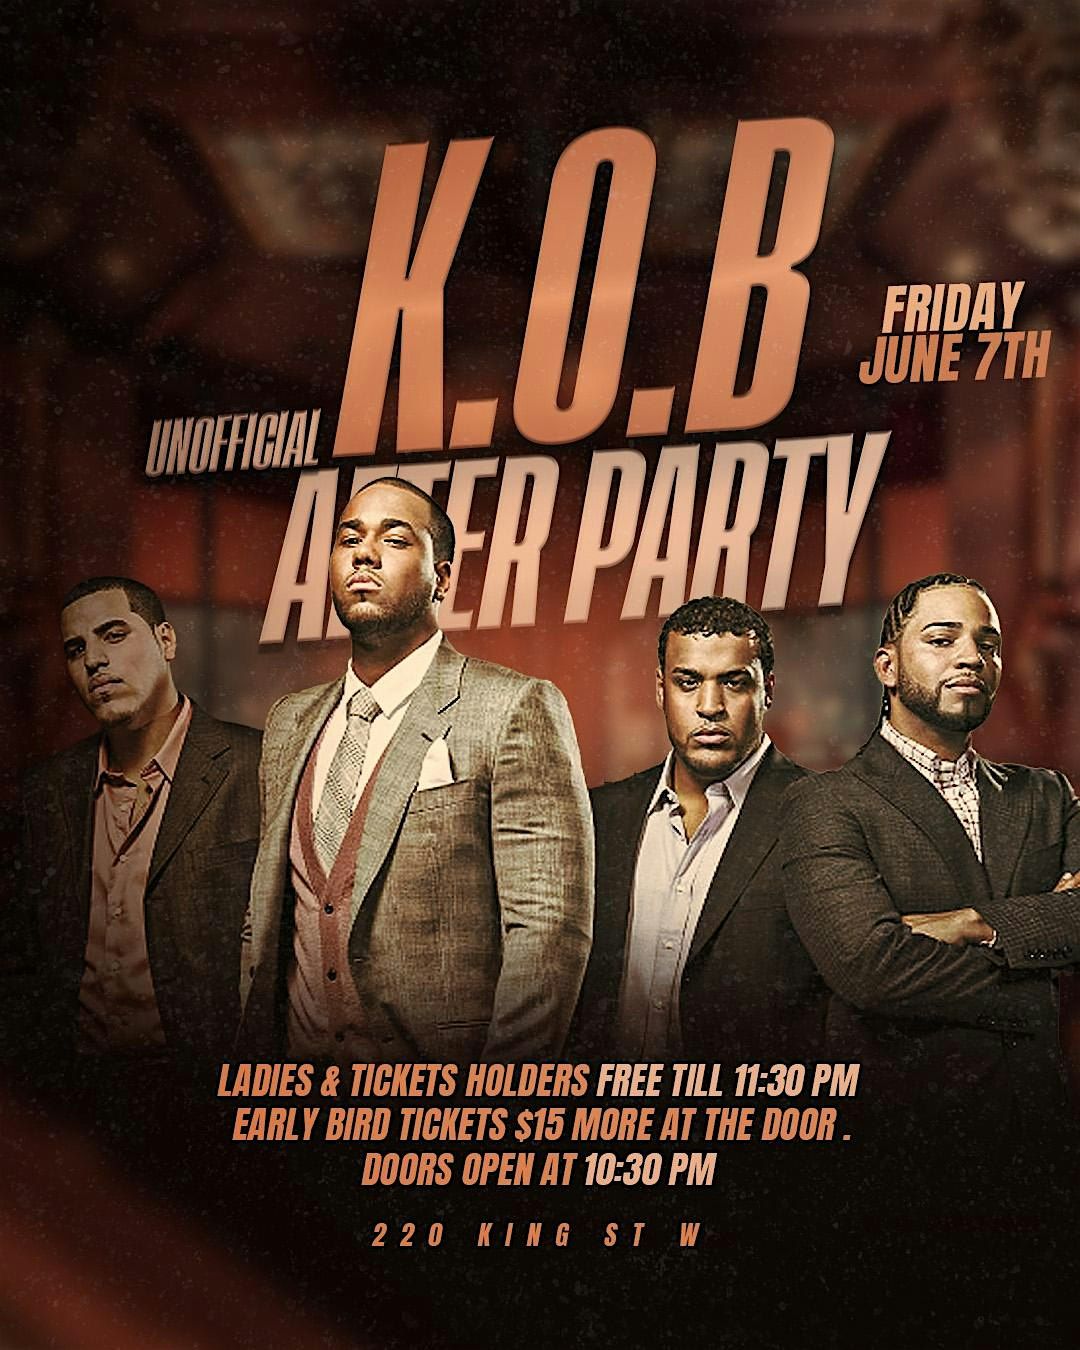 K.O.B Unofficial After Party!